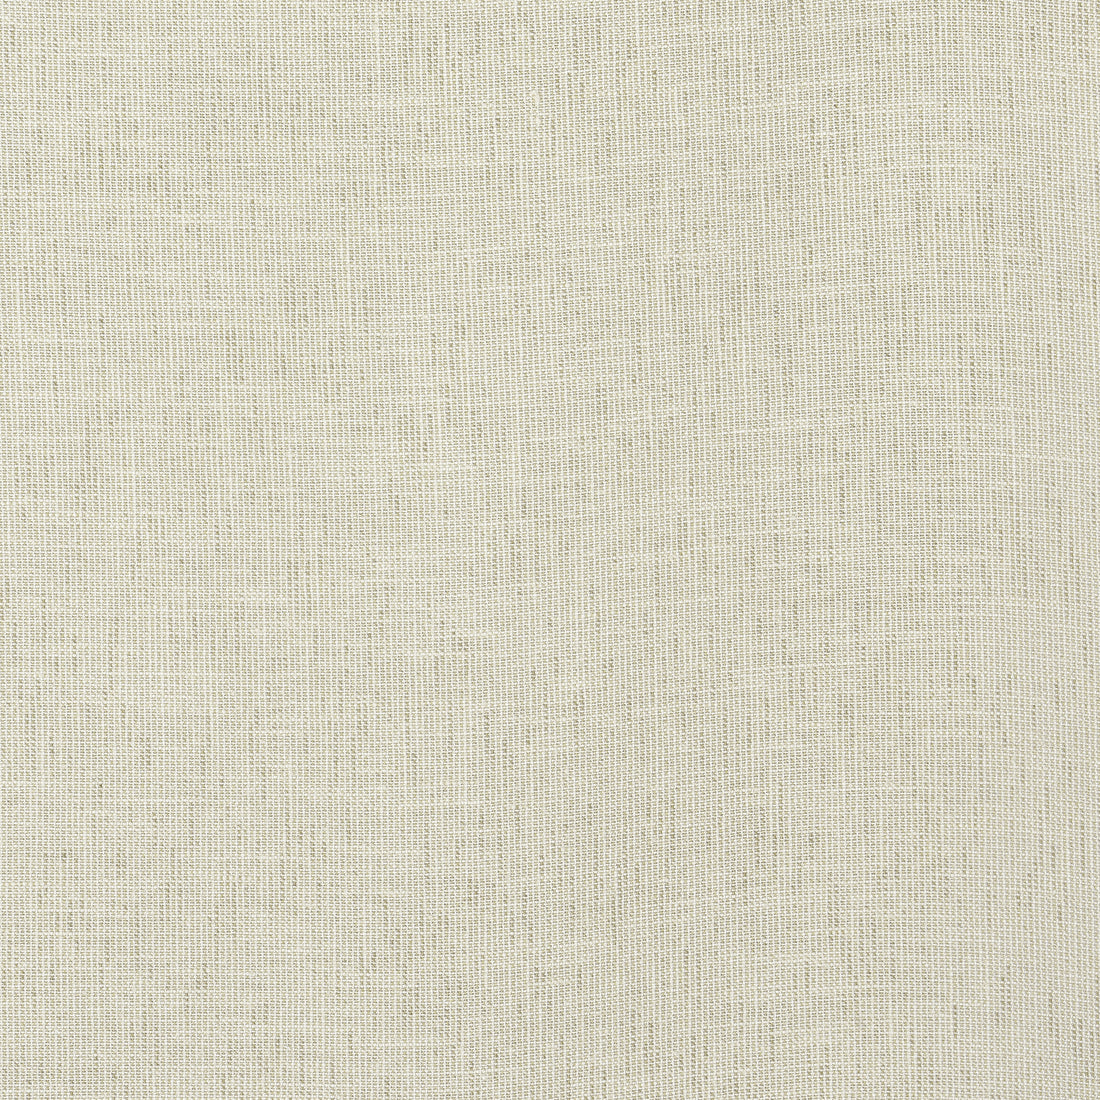 Ottawa fabric in tea color - pattern number FWW8247 - by Thibaut in the Aura collection